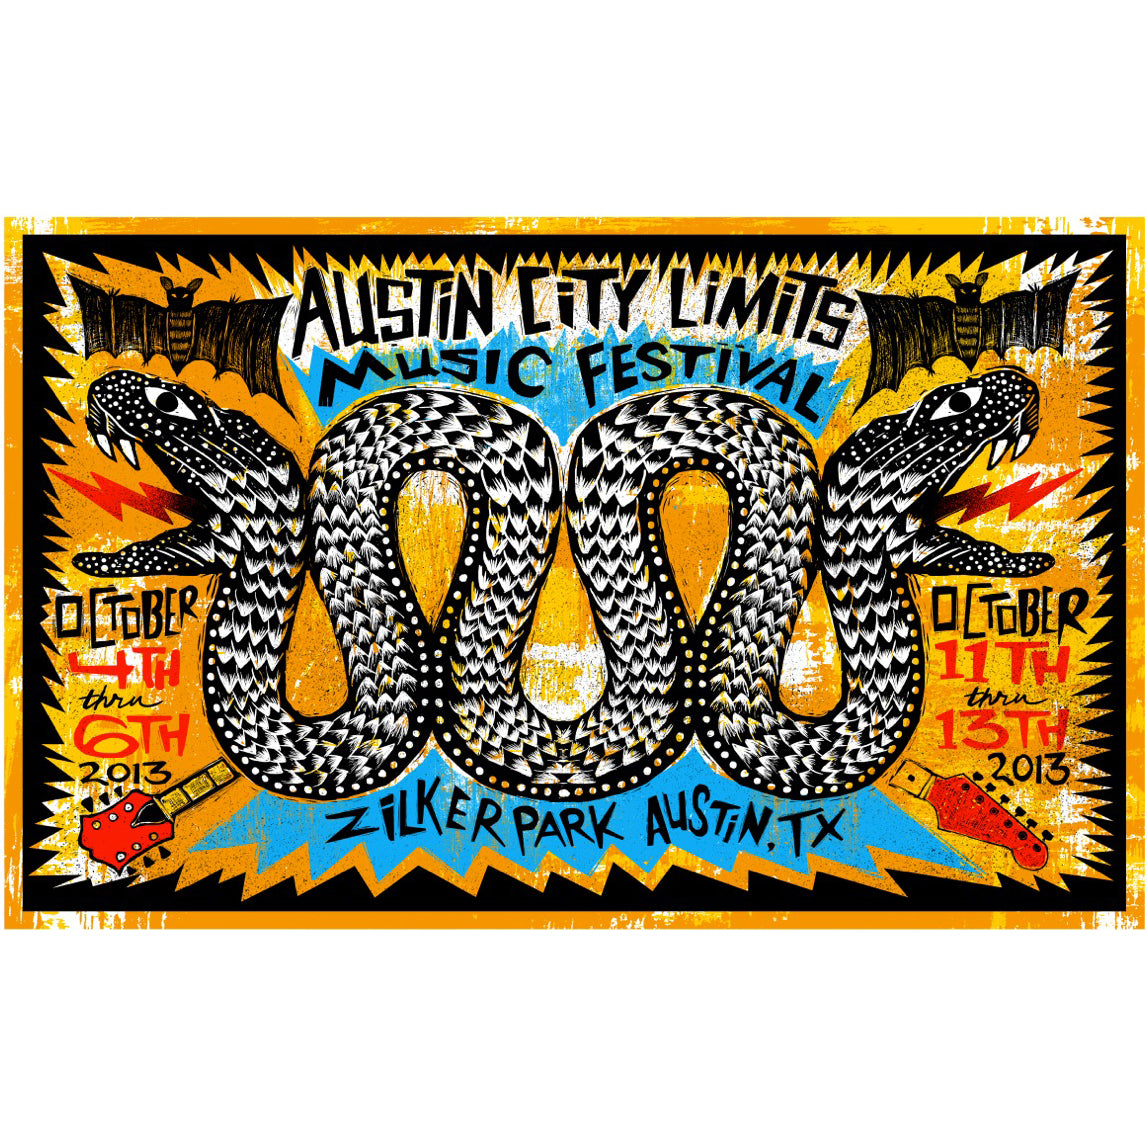 2013 Signed & Numbered ACL Festival Artist Poster